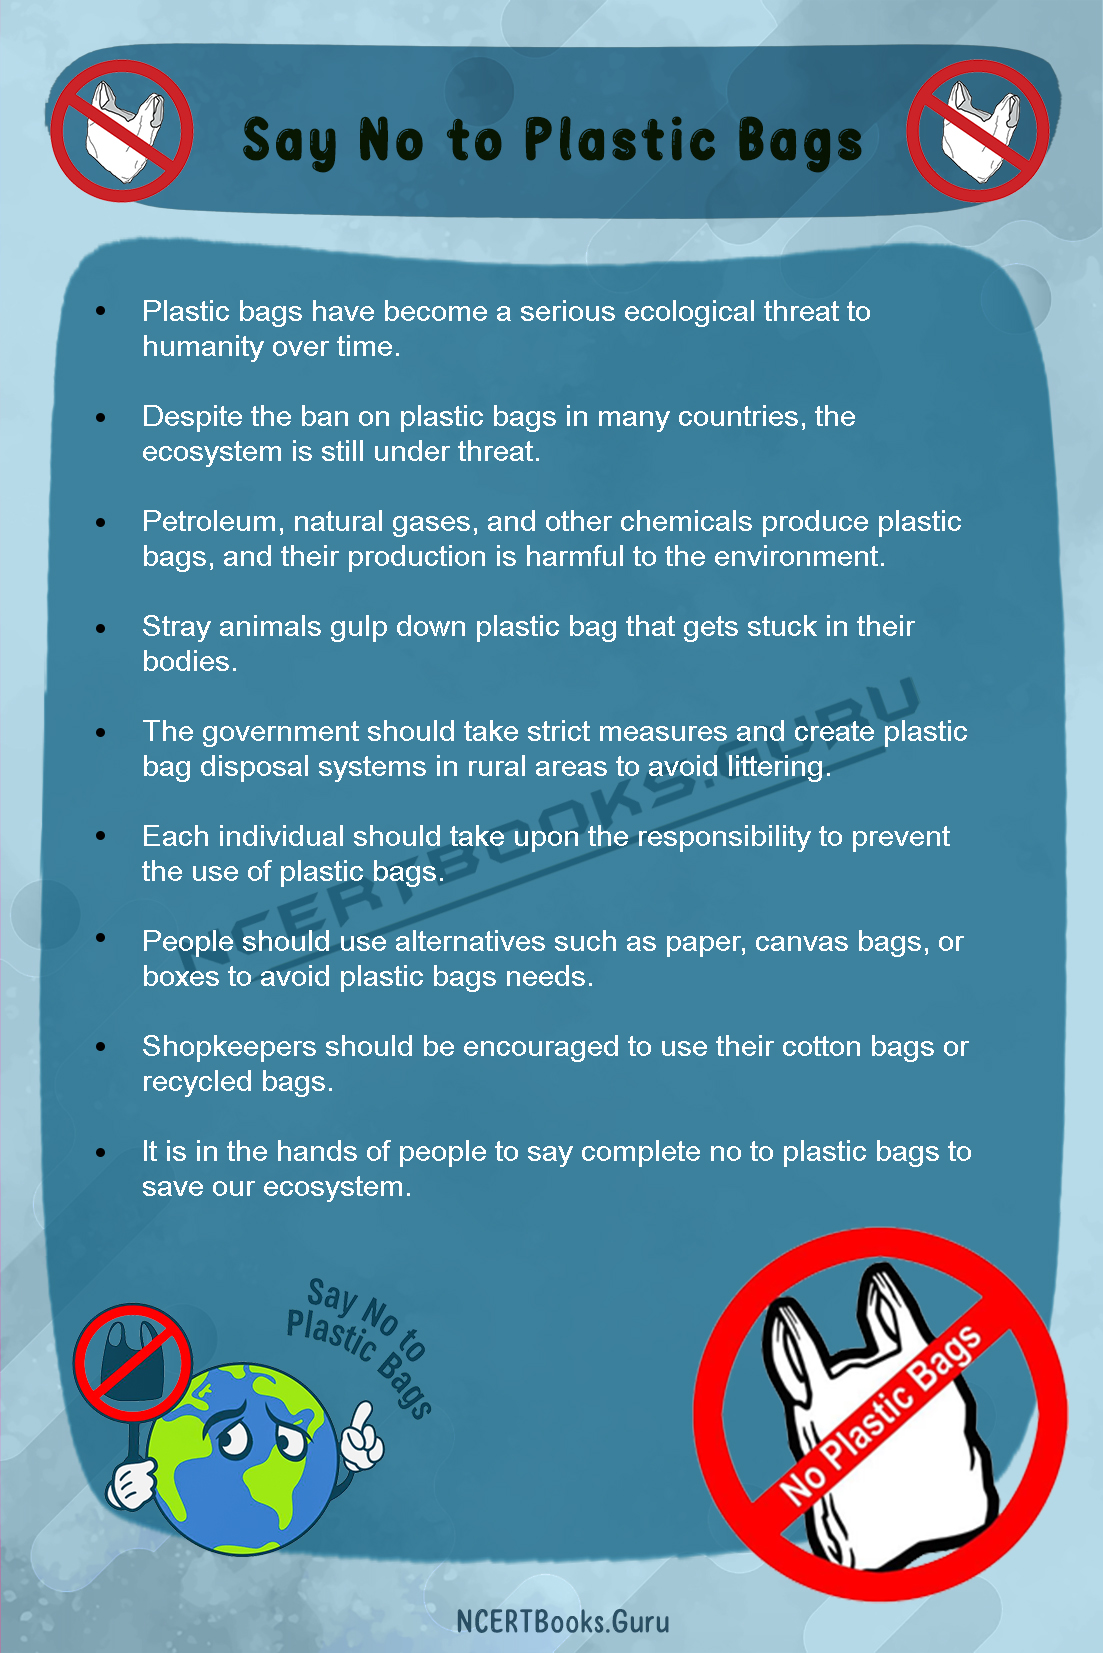 10 Lines on Say No to Plastic Bags 2